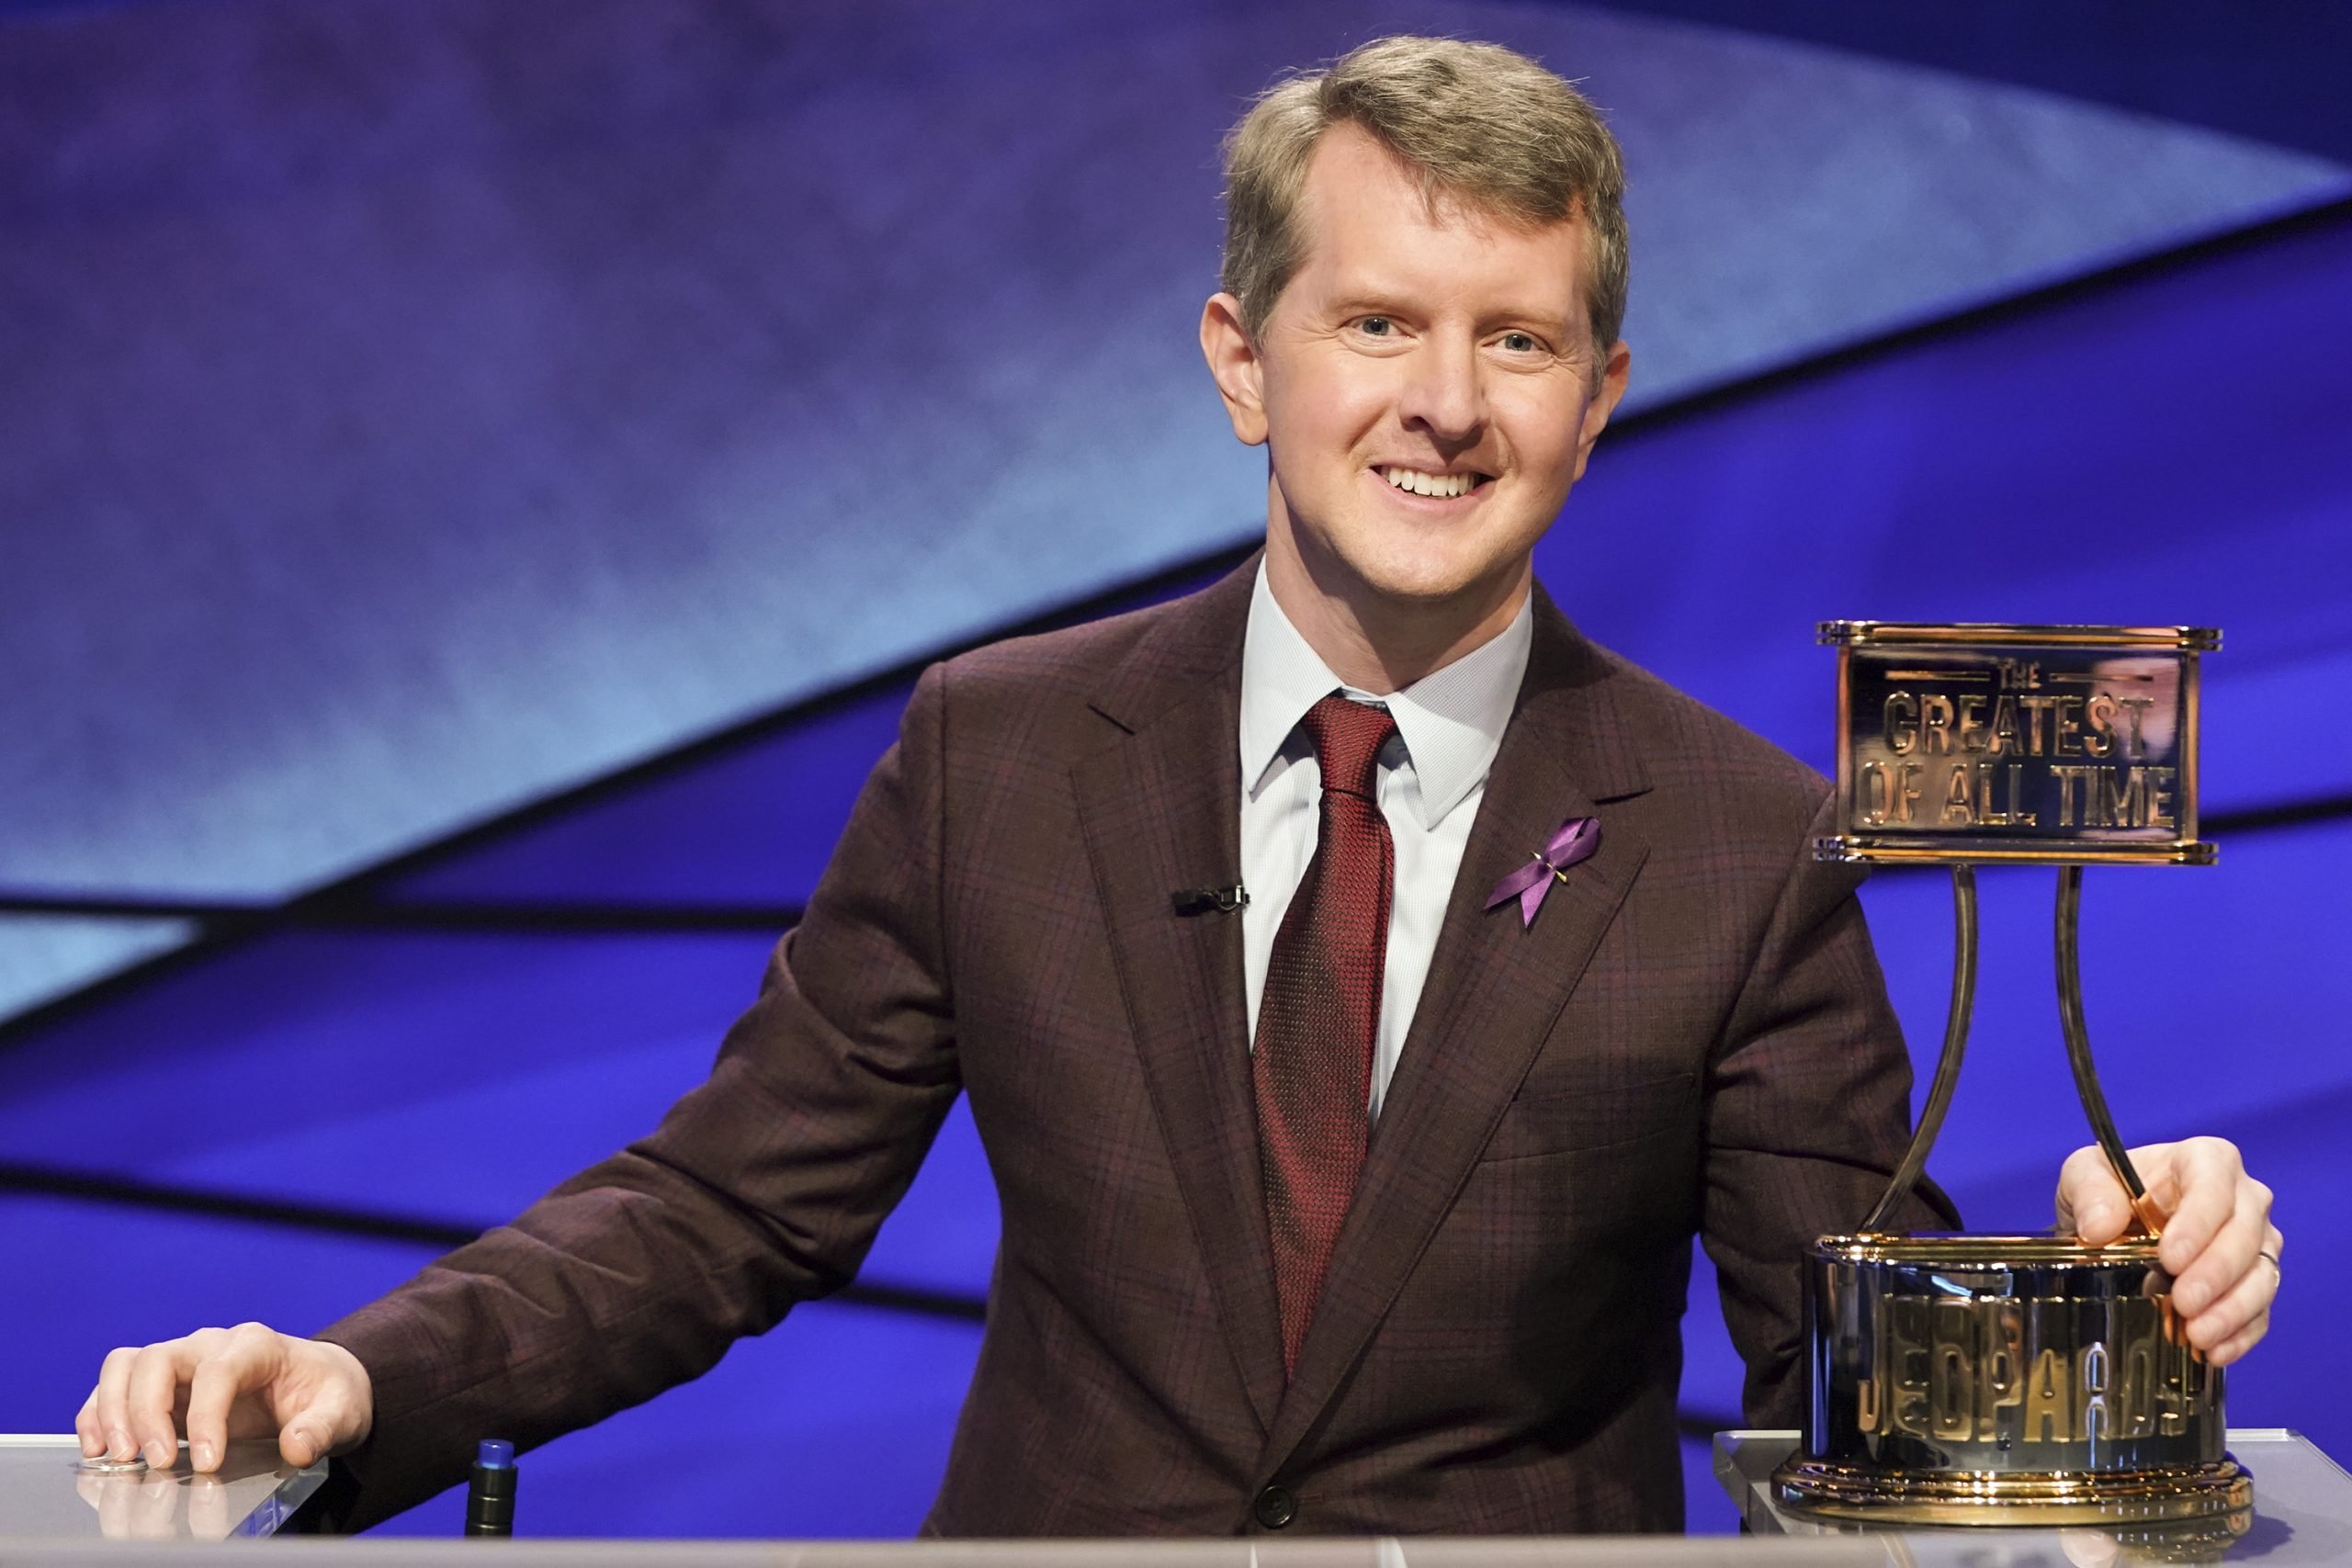 Ken Jennings with the 'Jeopardy!: The Greatest of All Time' statue